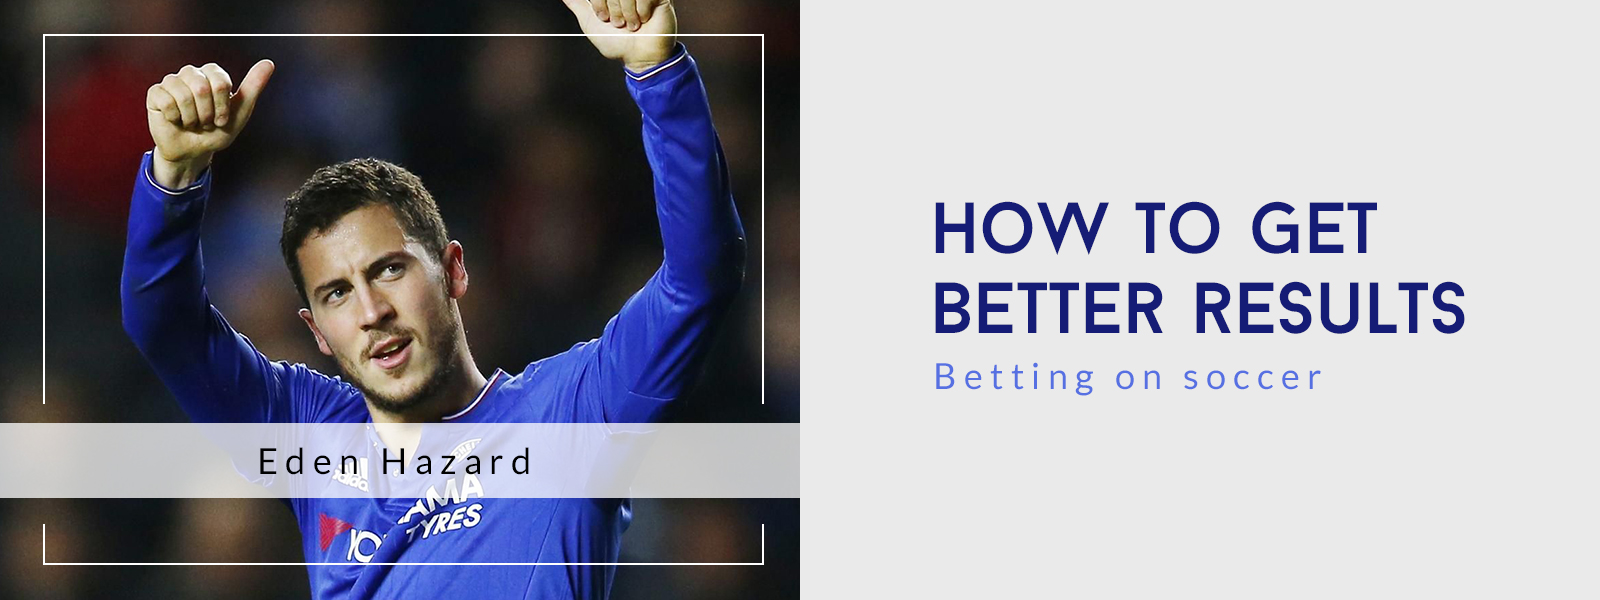 How to get better results betting on soccer